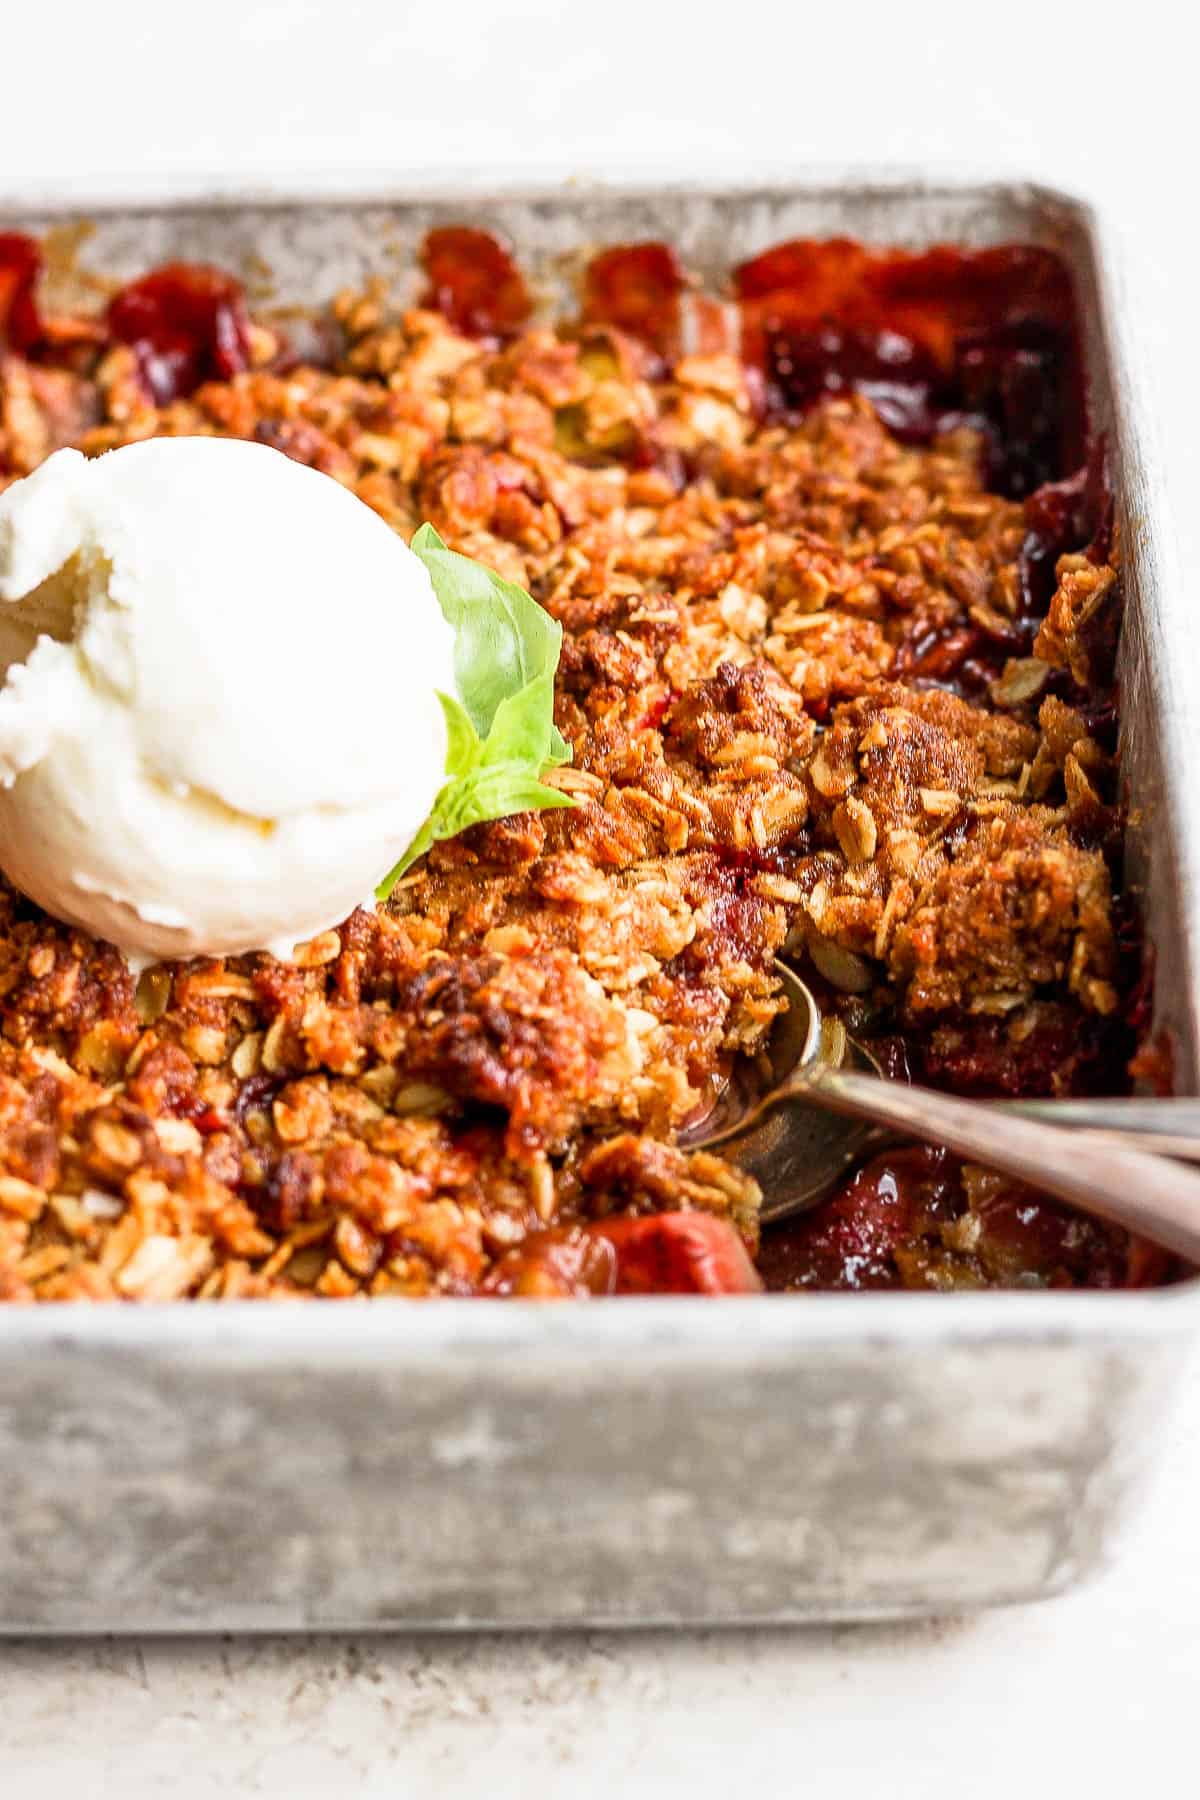 Strawberry rhubarb crisp in a baking pan topped with vanilla ice cream.